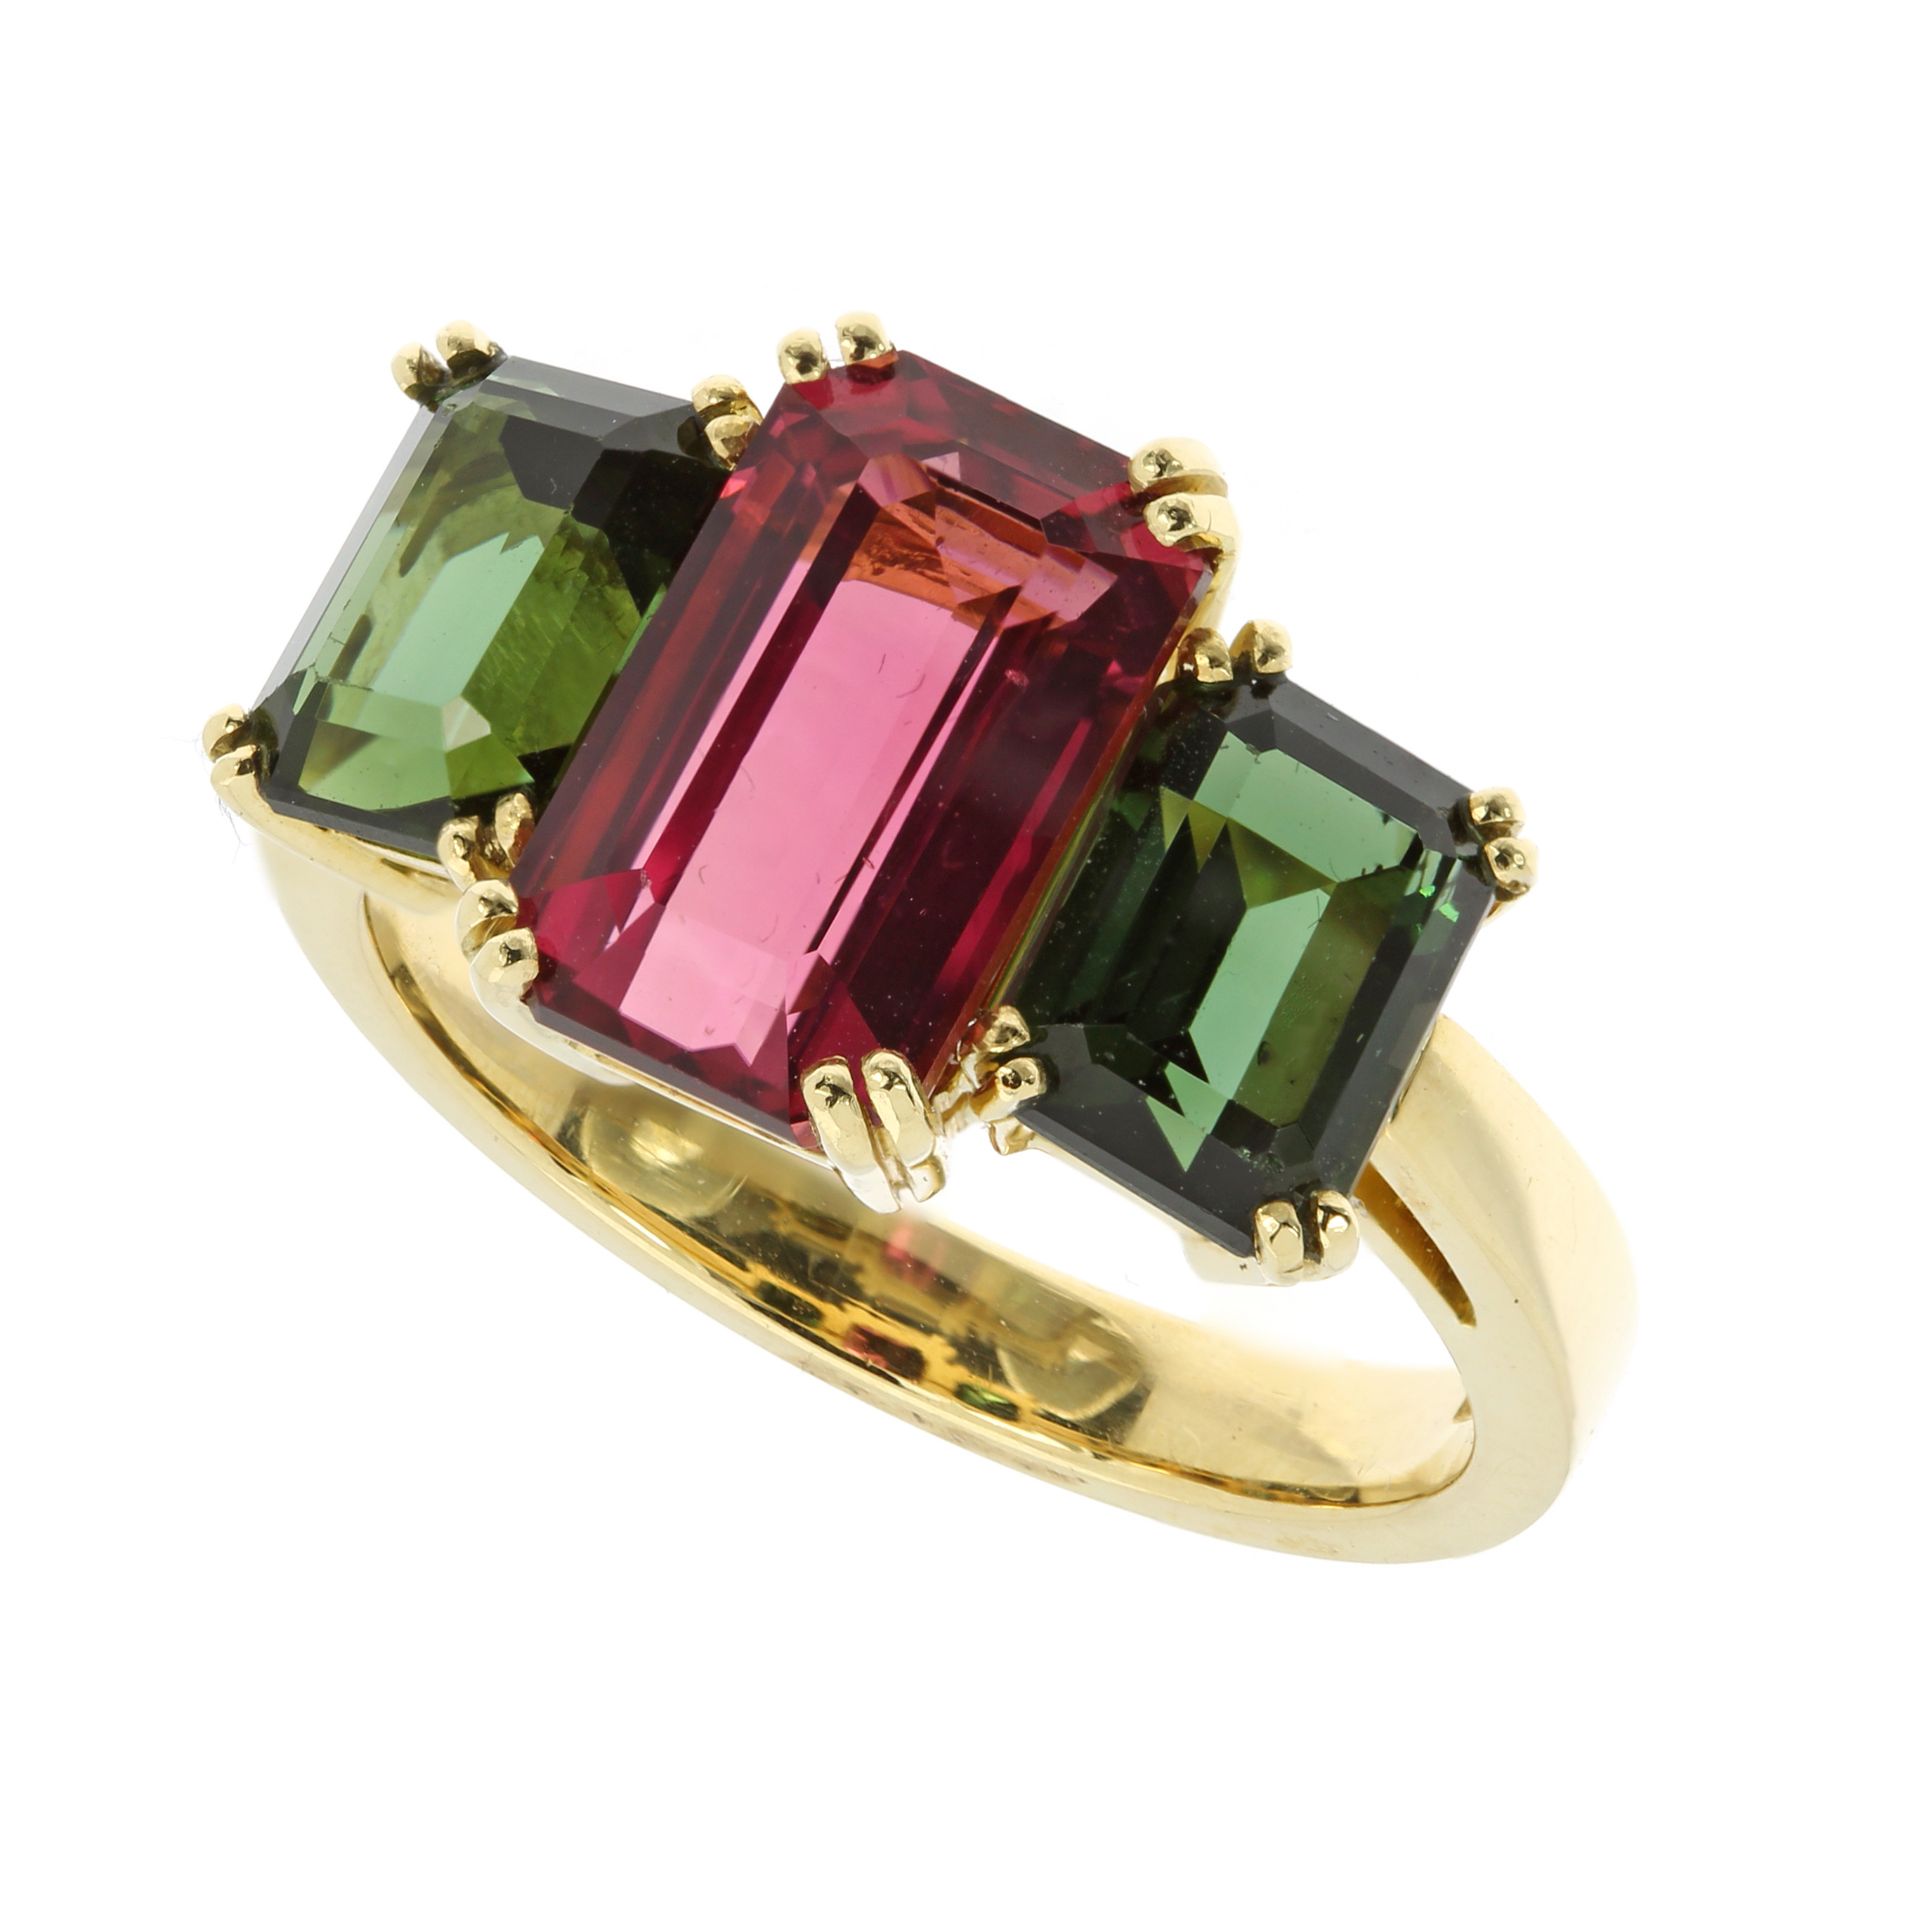 A PINK AND GREEN TOURMALINE DRESS RING in 18ct yellow gold, set with a central emerald cut pink